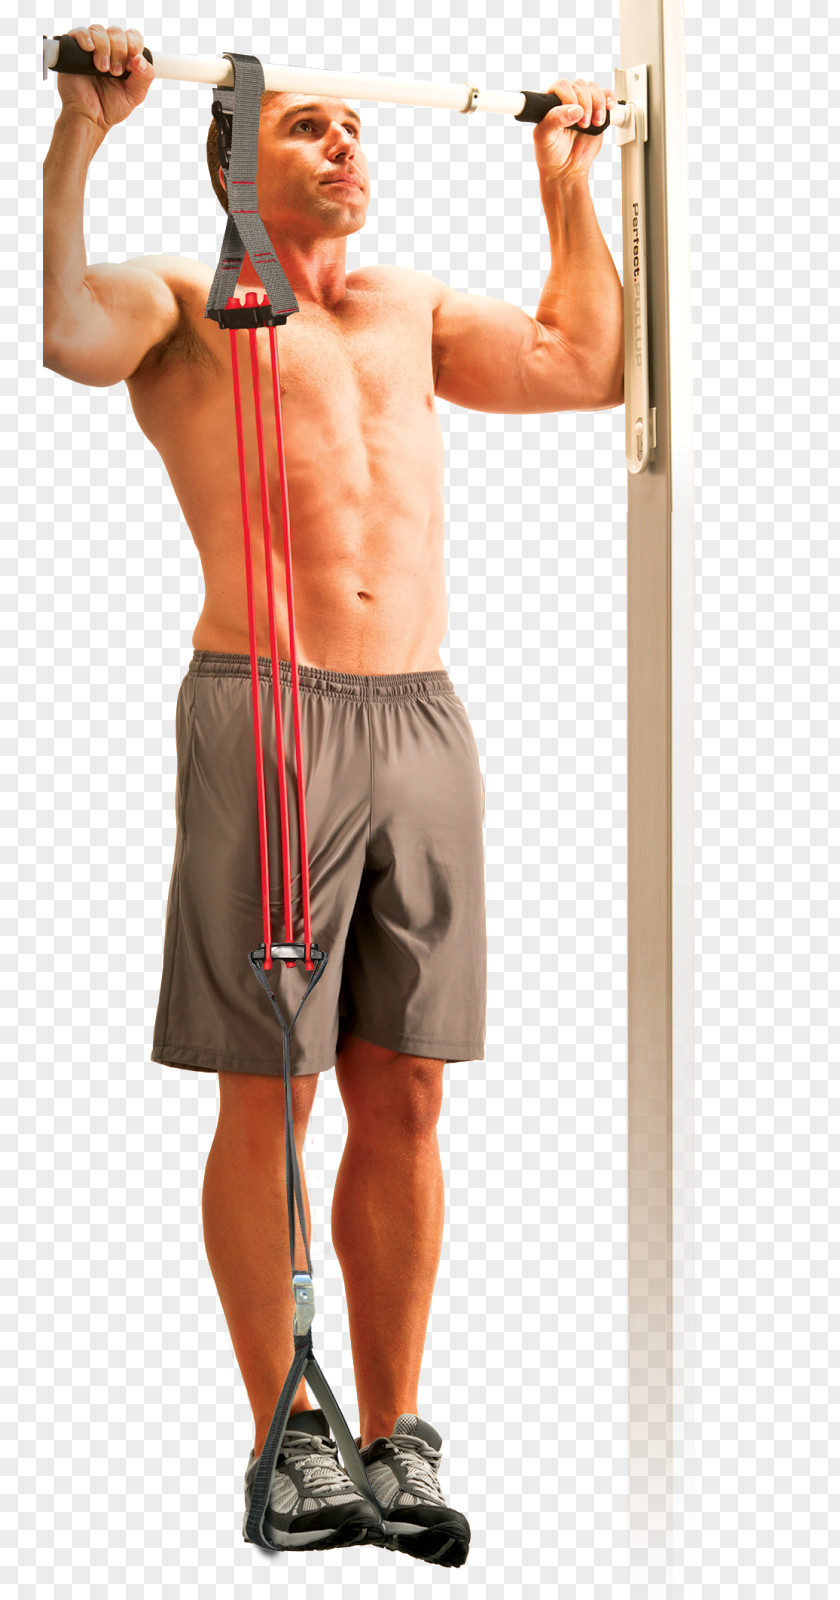 Barbell Weight Training Pull-up Exercise Equipment PNG